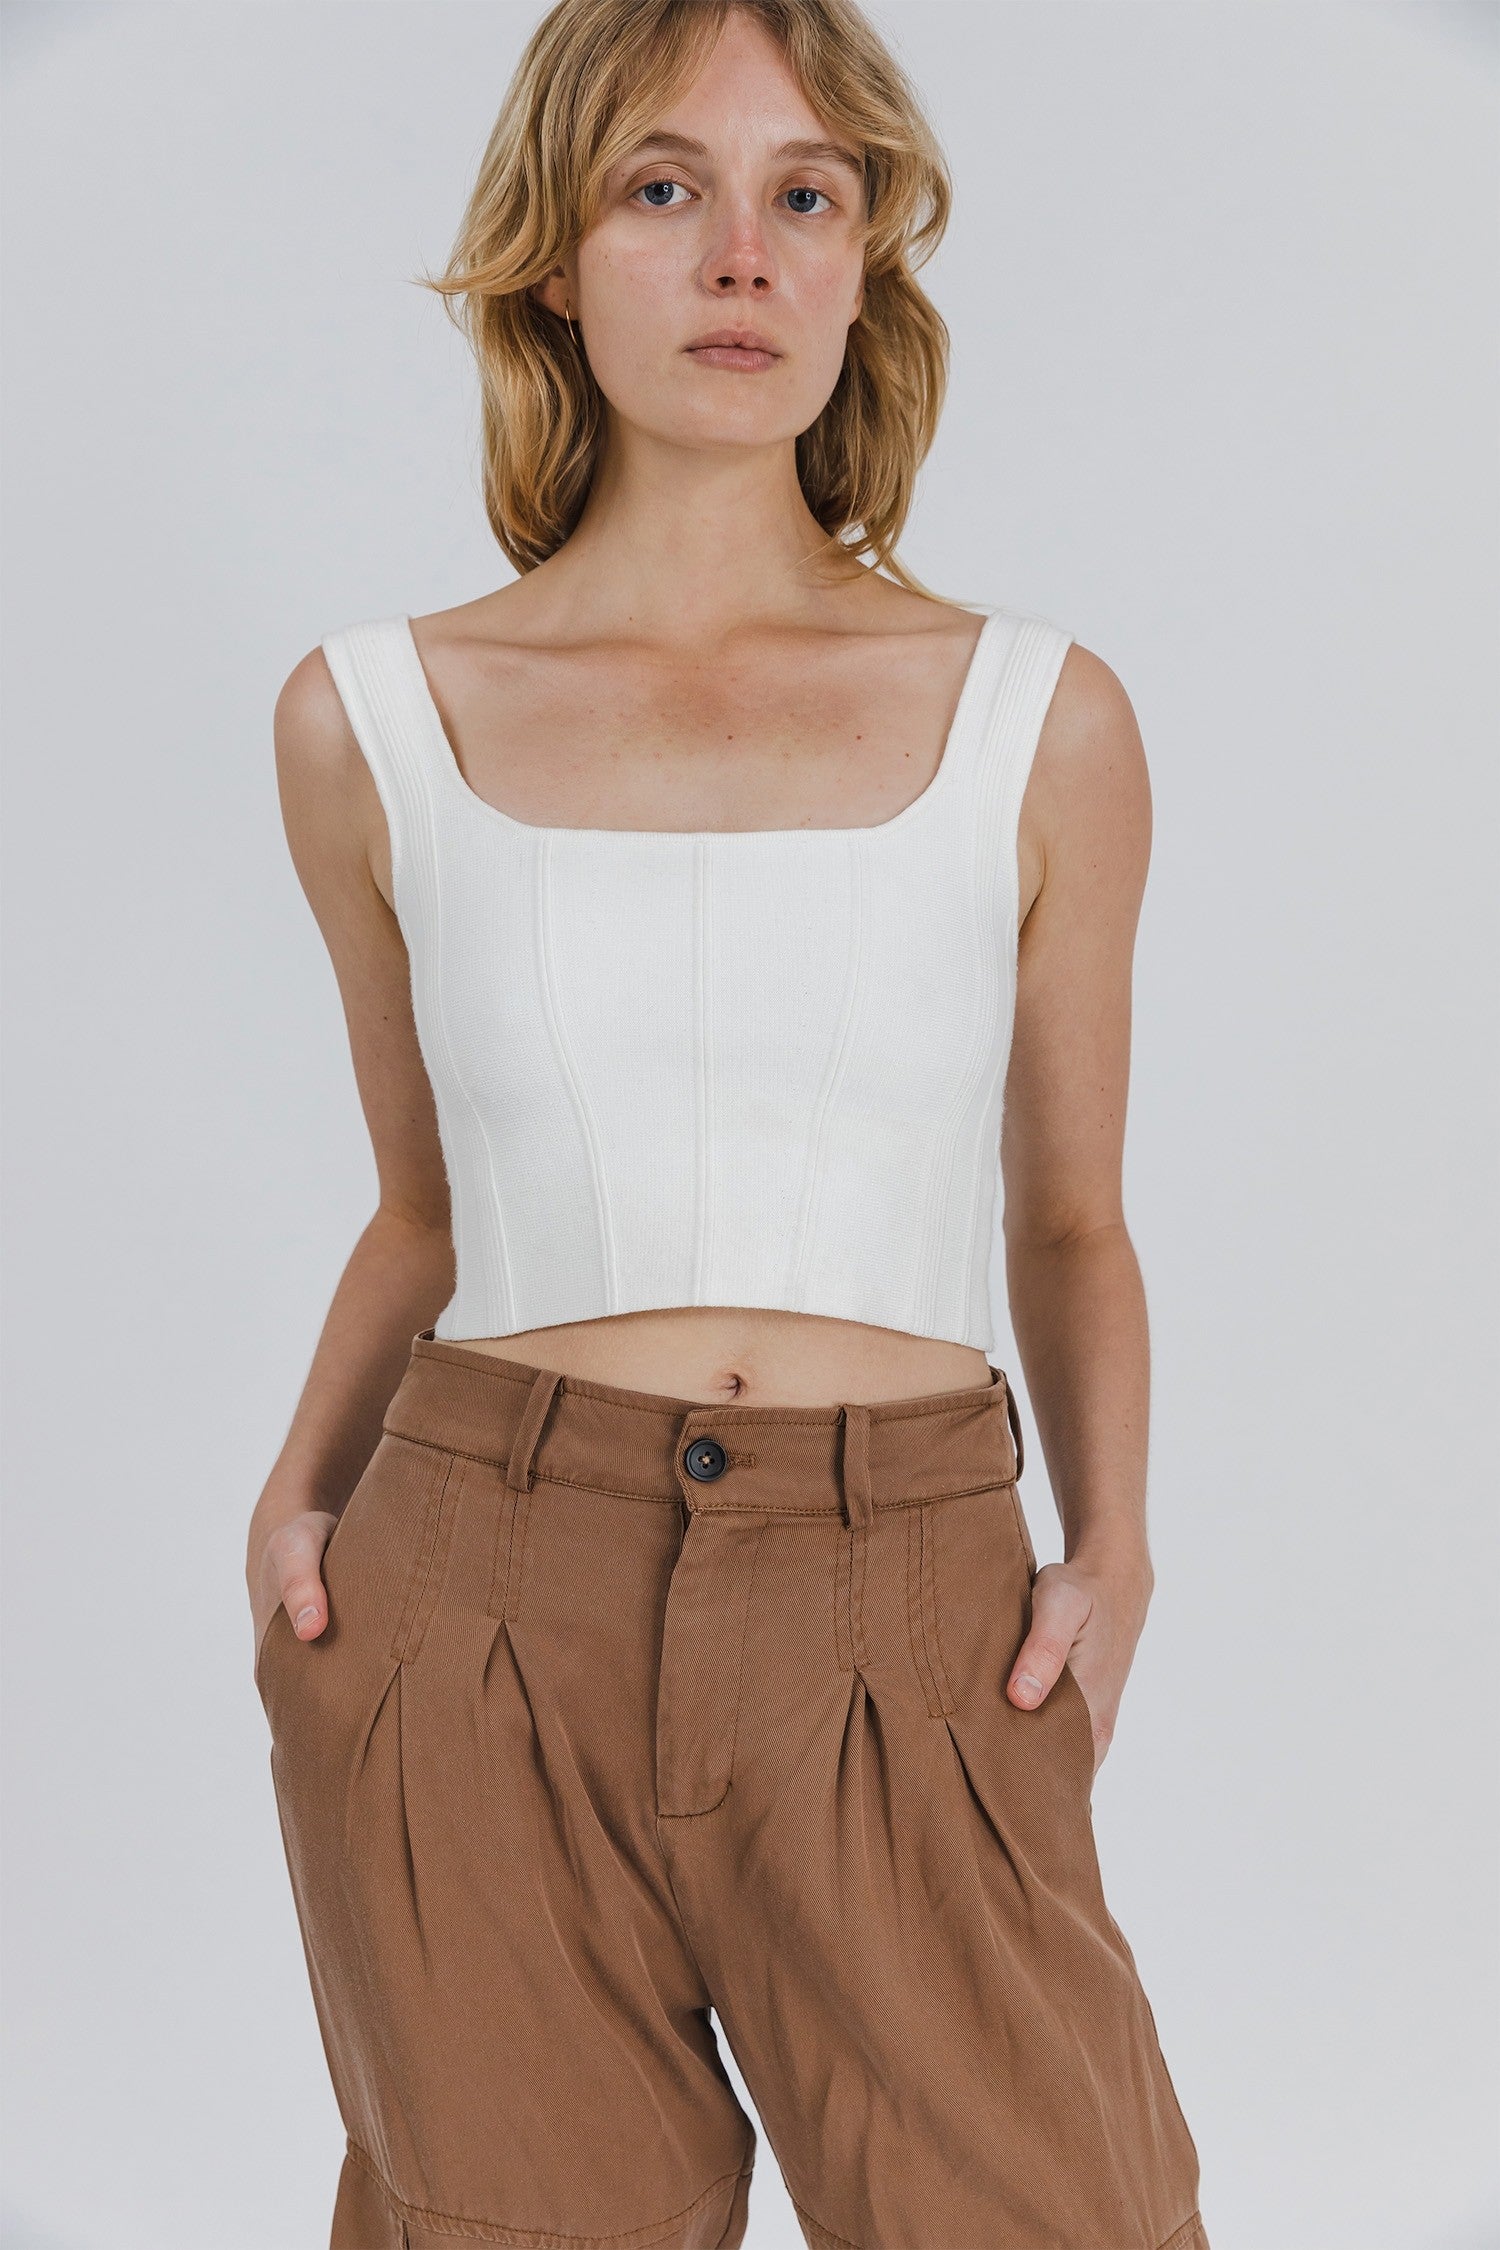 All : Row, The Millie Top in Ivory - Boutique Dandelion